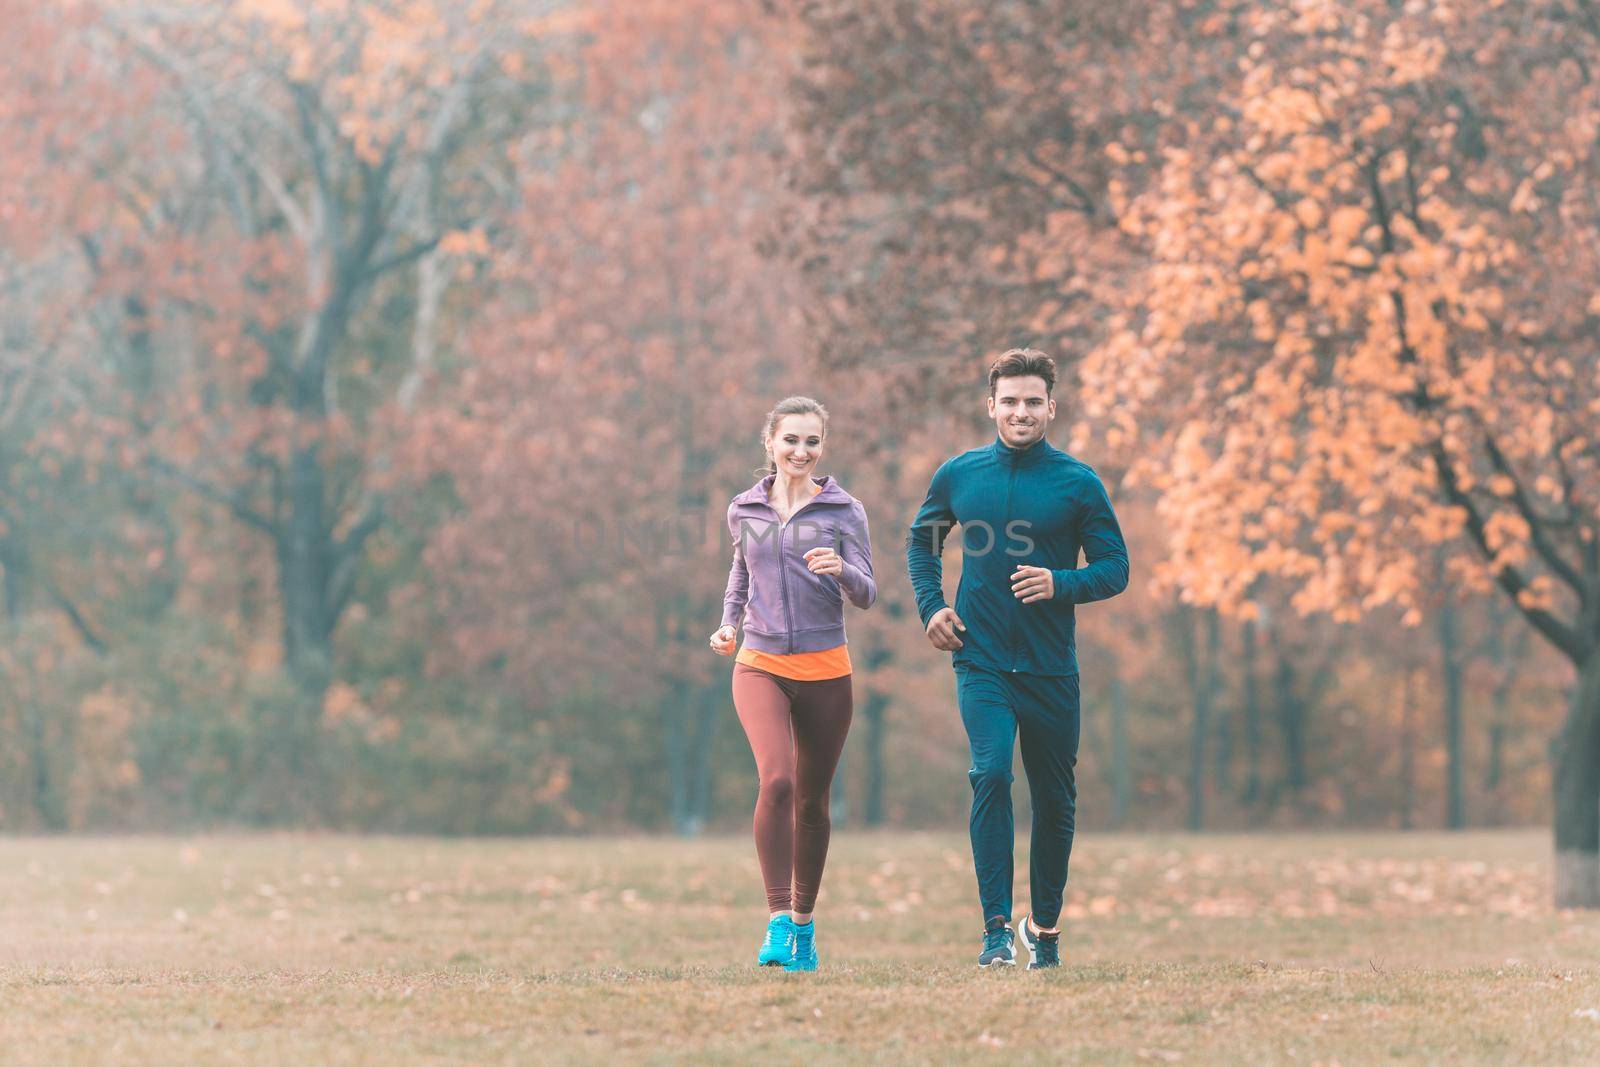 Couple in wonderful fall landscape running for better fitness towards the camera